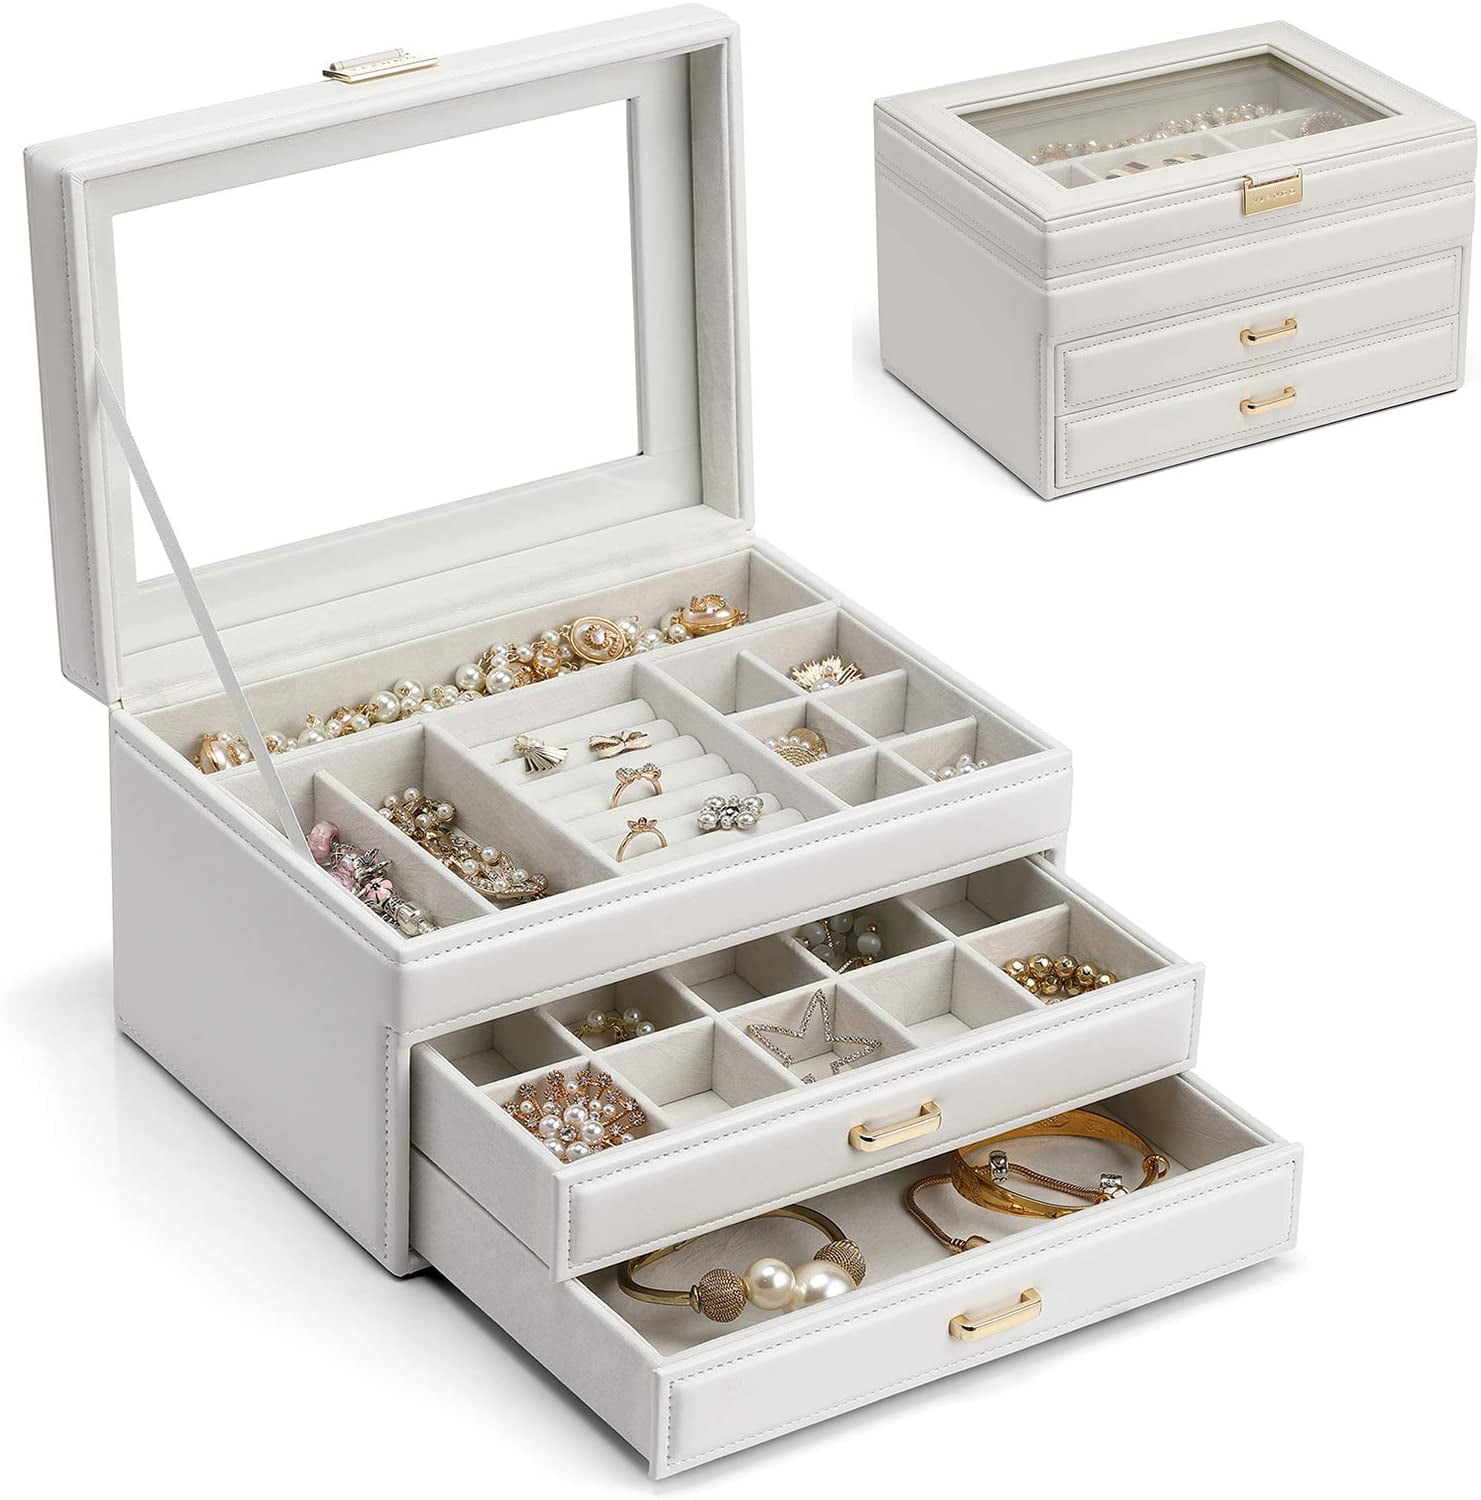 Details about   Jewelry Case Transparent Desktop Tool Box Organizer Container Acrylic 